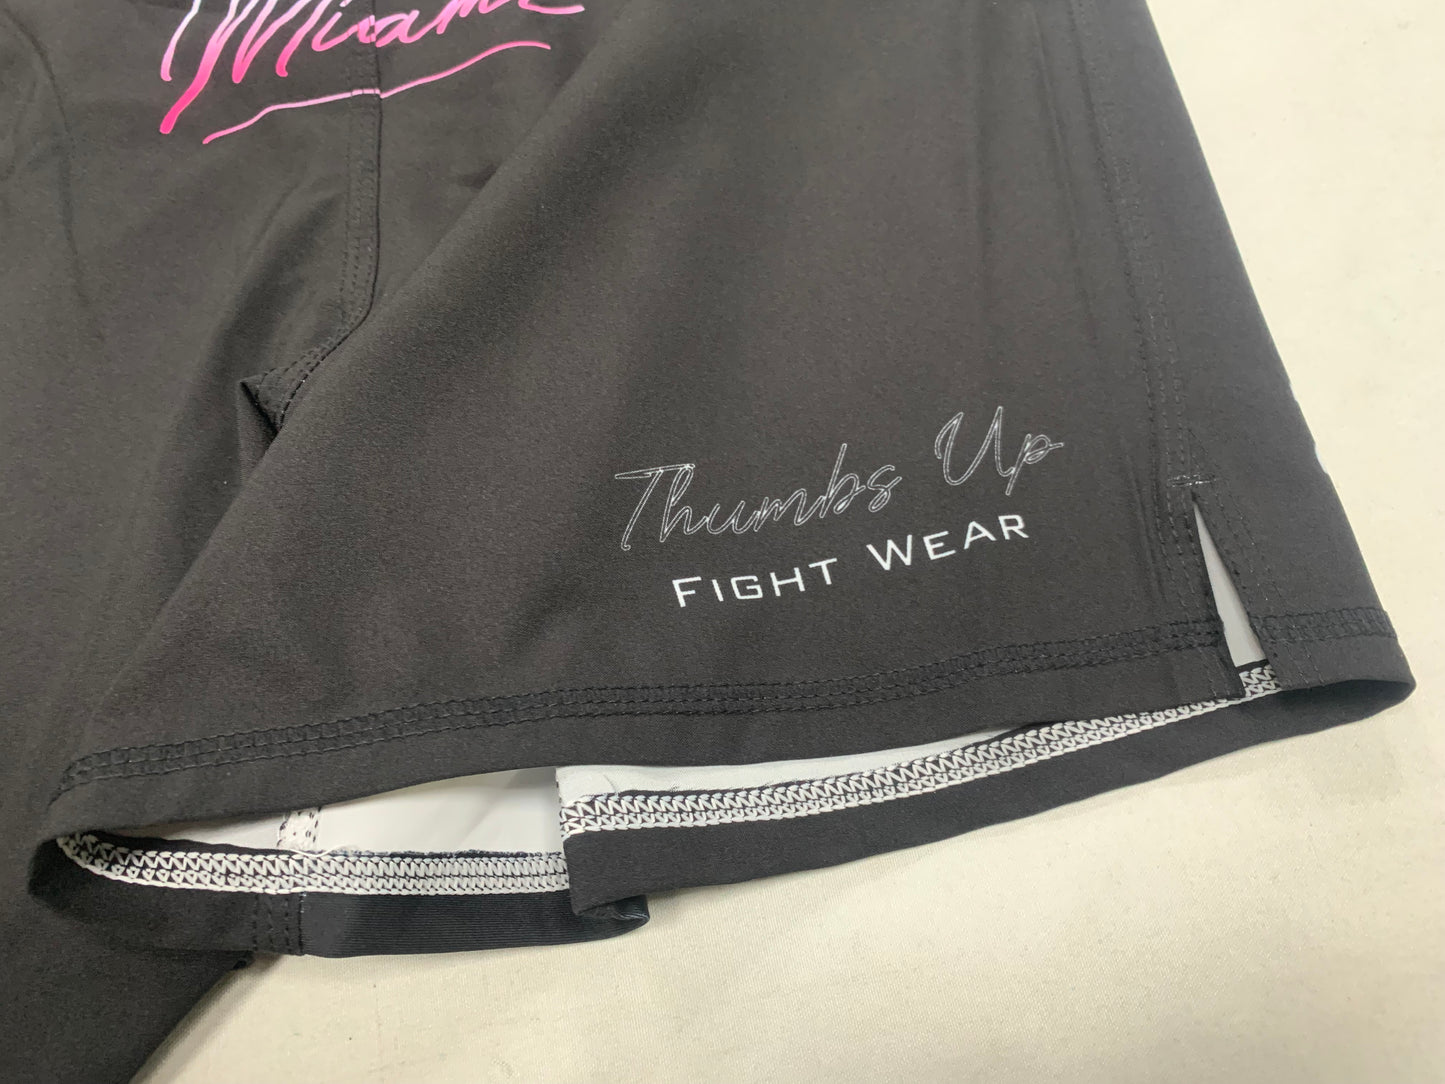 10th Planet Miami SHORTS - Grappling Shorts - Black with Miami Pink/Blue Colors #Trainordont